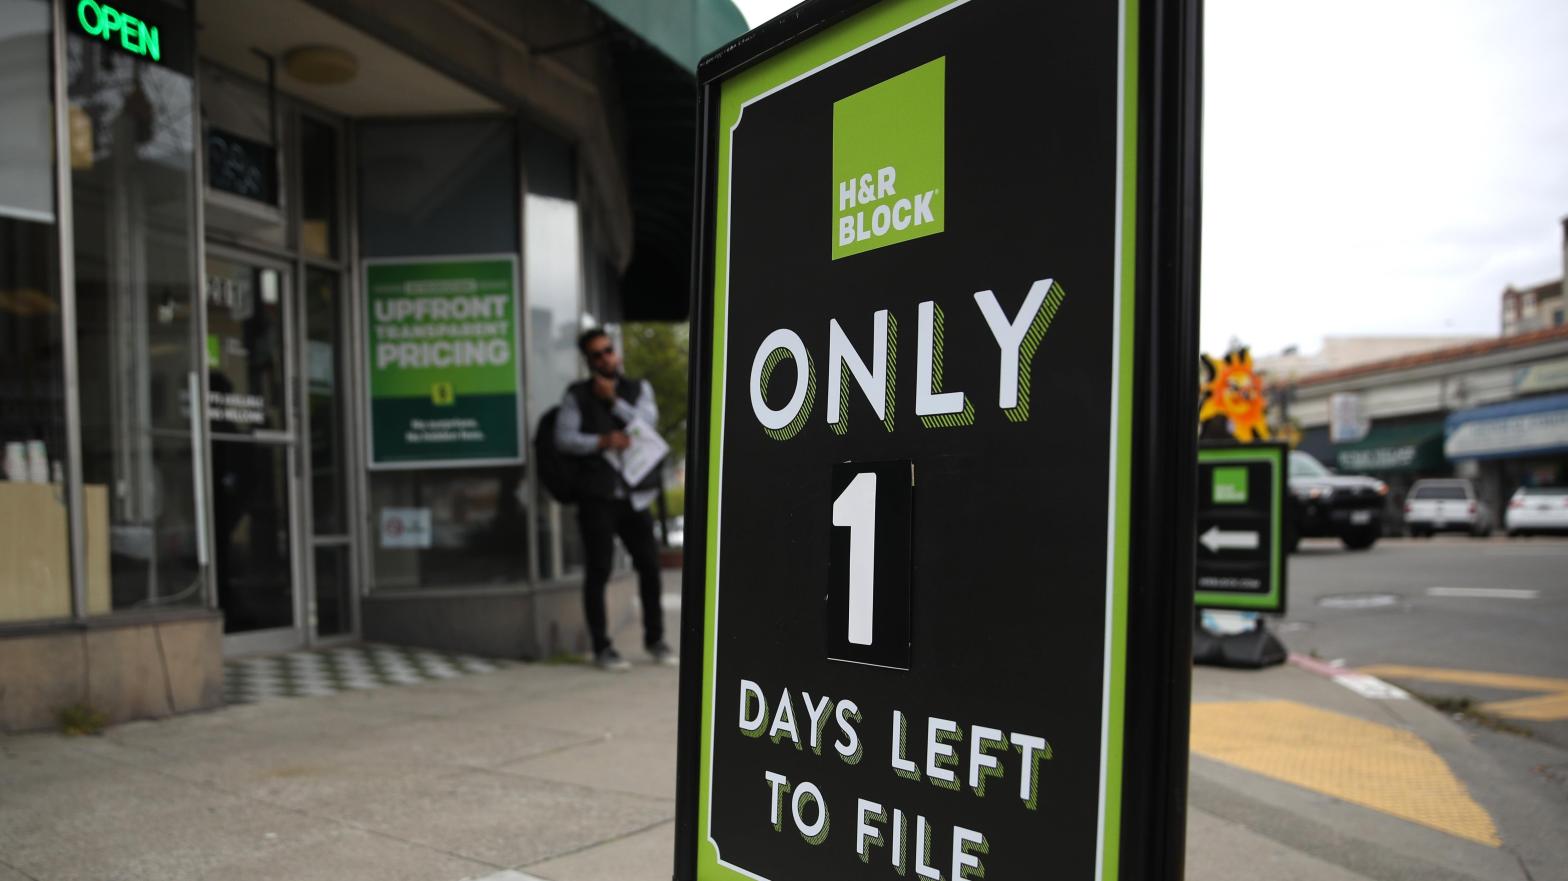 H&R Block was cited as one of the major digital tax filing services employing Meta Pixel, which was sending sensitive financial info over to Meta. (Photo: Justin Sullivan, Getty Images)